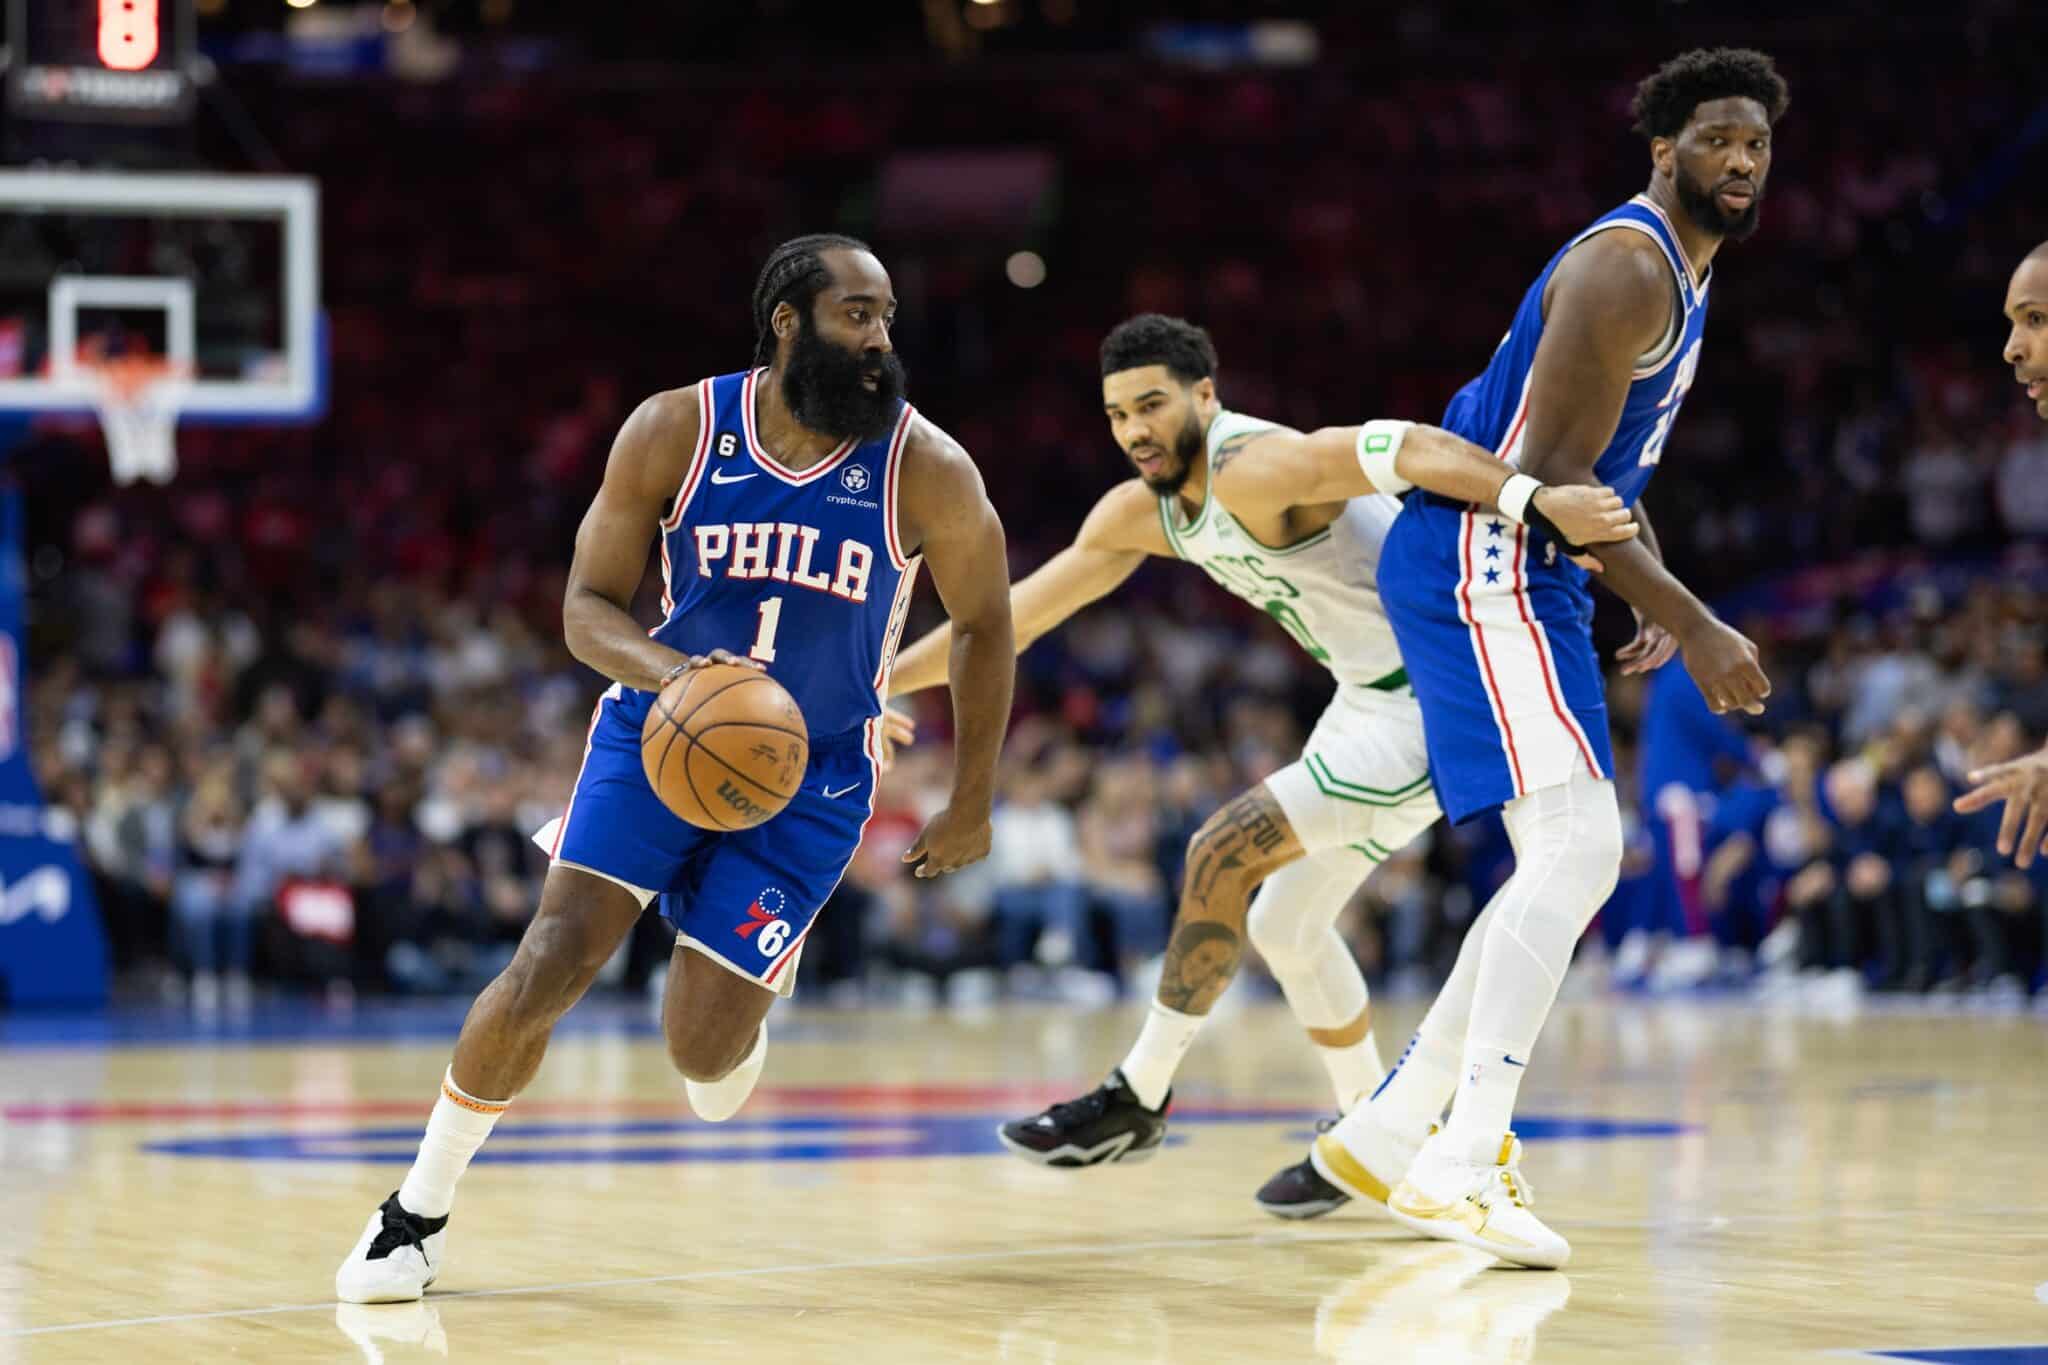 Editorial Note: We are Banning All Non-Arena Sixers Stories, Indefinitely